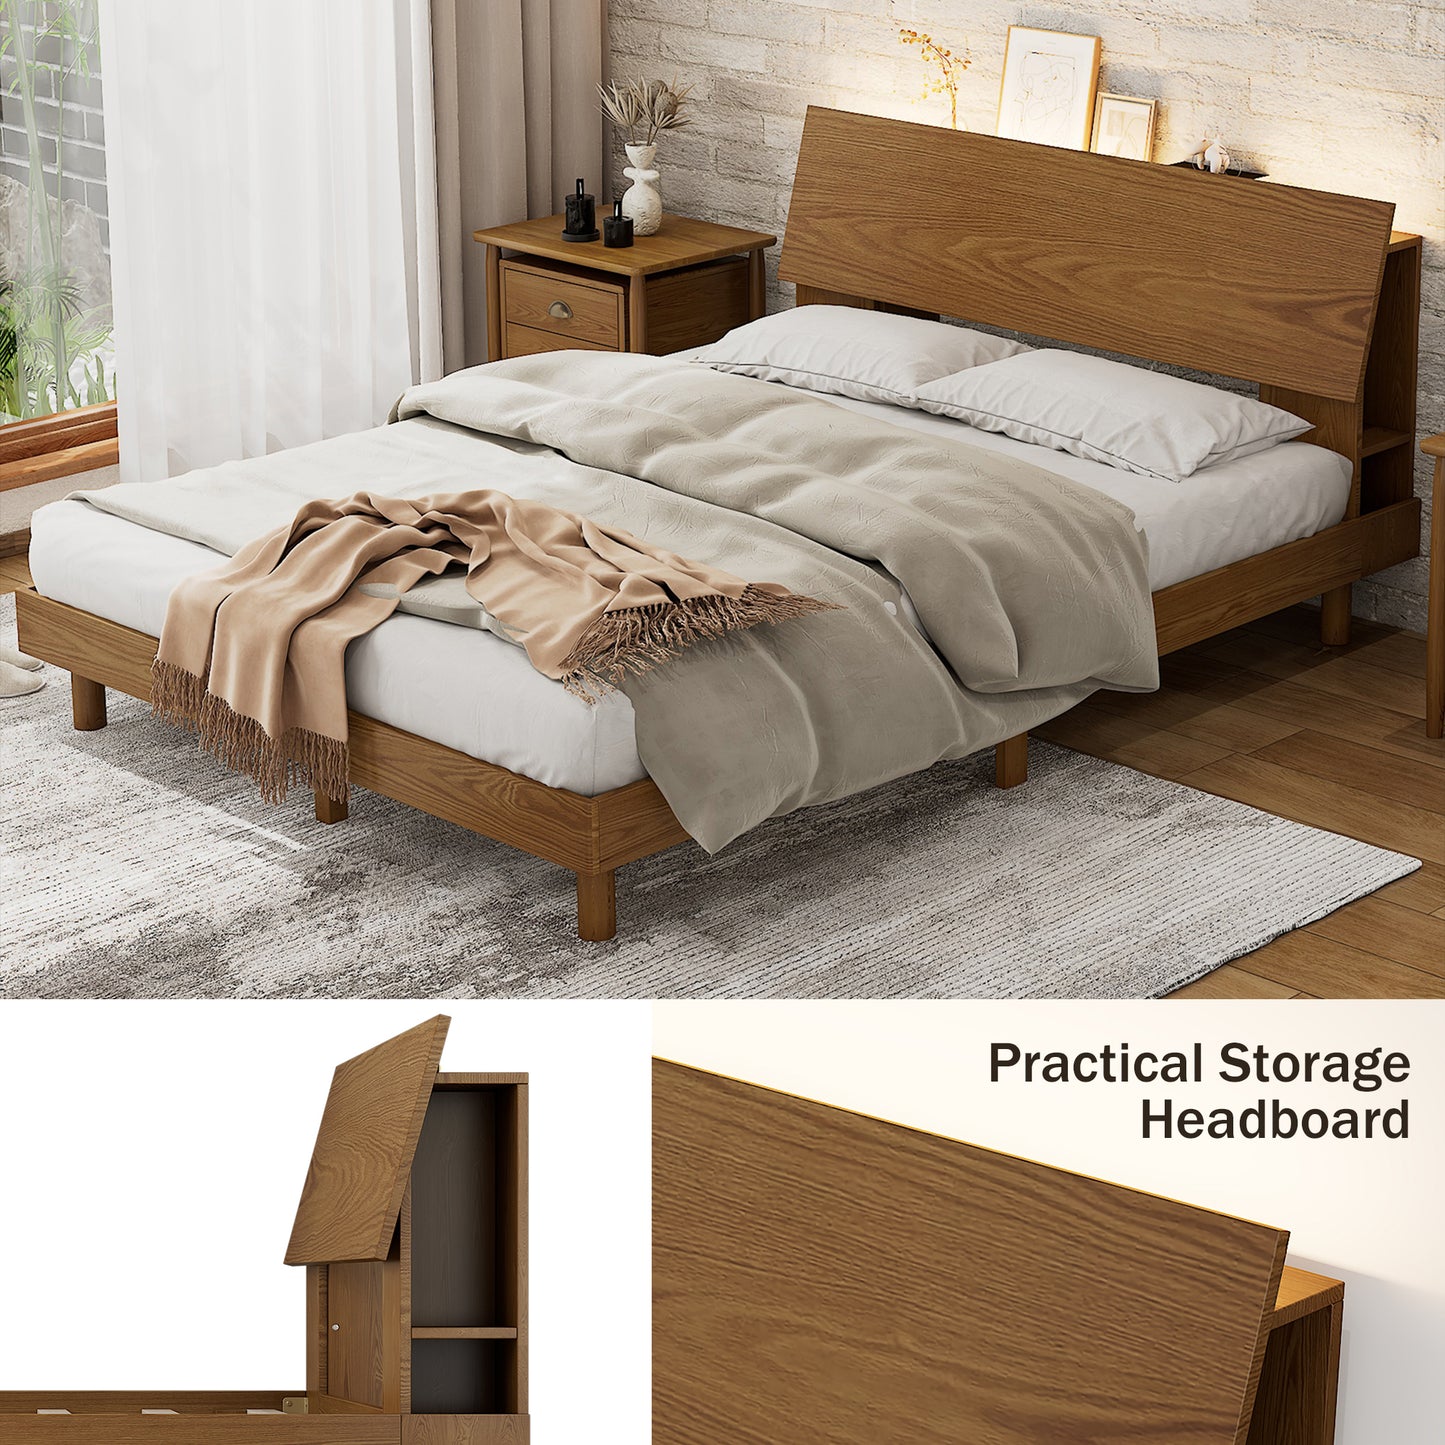 3 Pieces Bedroom Sets Mid Century Platform Queen Bed with Bookshelf and Led Lights and USB Port with two nightstands - Enova Luxe Home Store